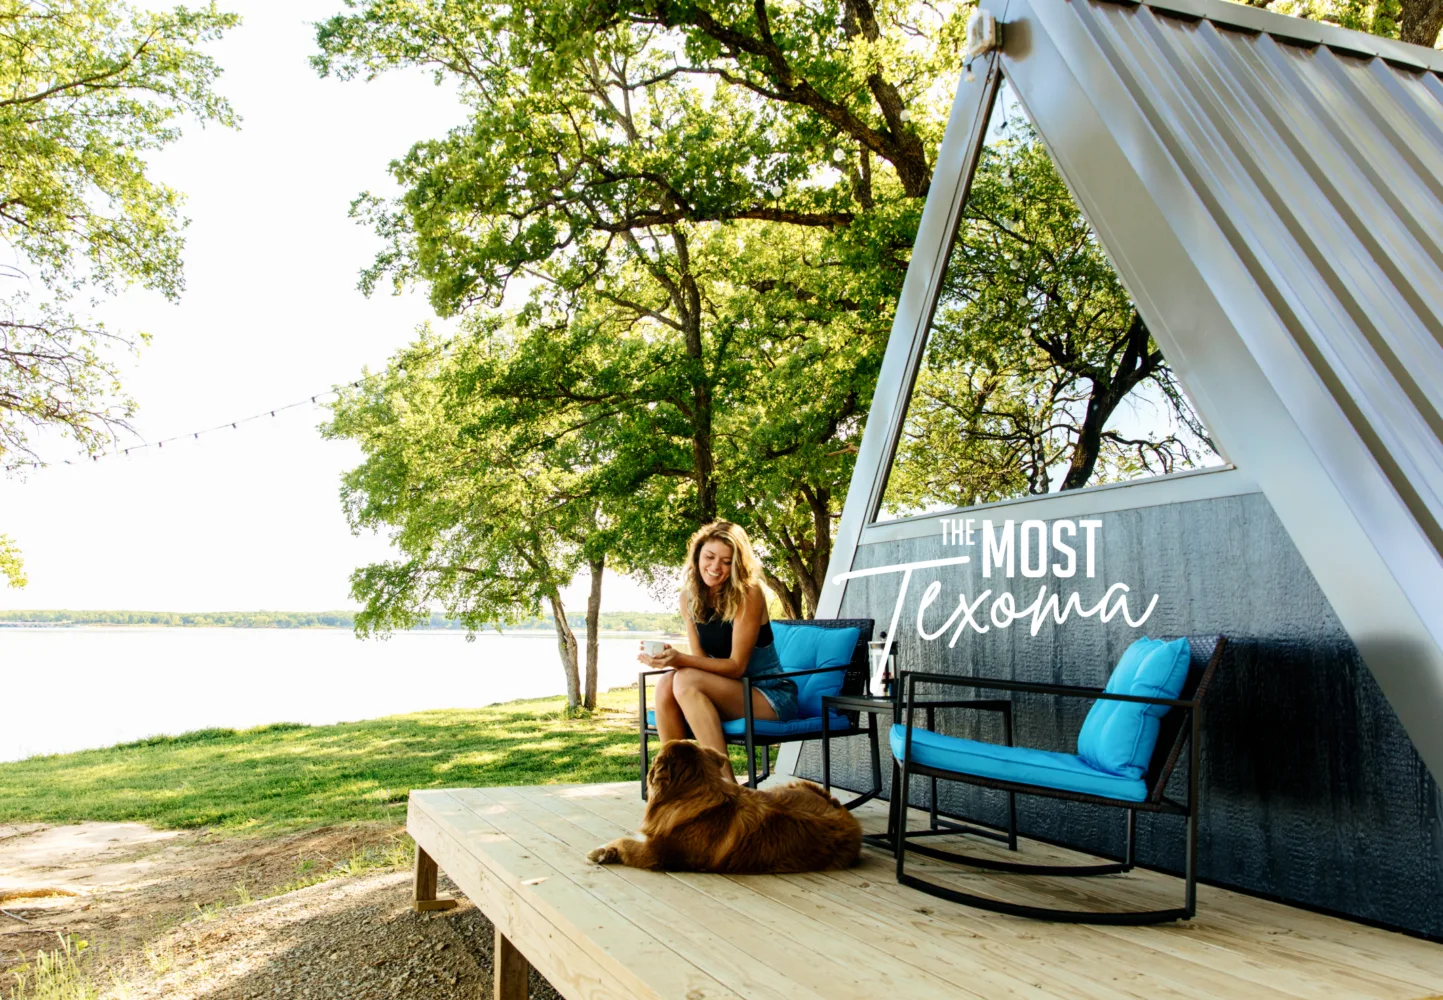 Texoma Destinations Welcomes You to All Things Lake Texoma. See Agency Creative's new ad campaign for this group of Lake Texoma resorts.